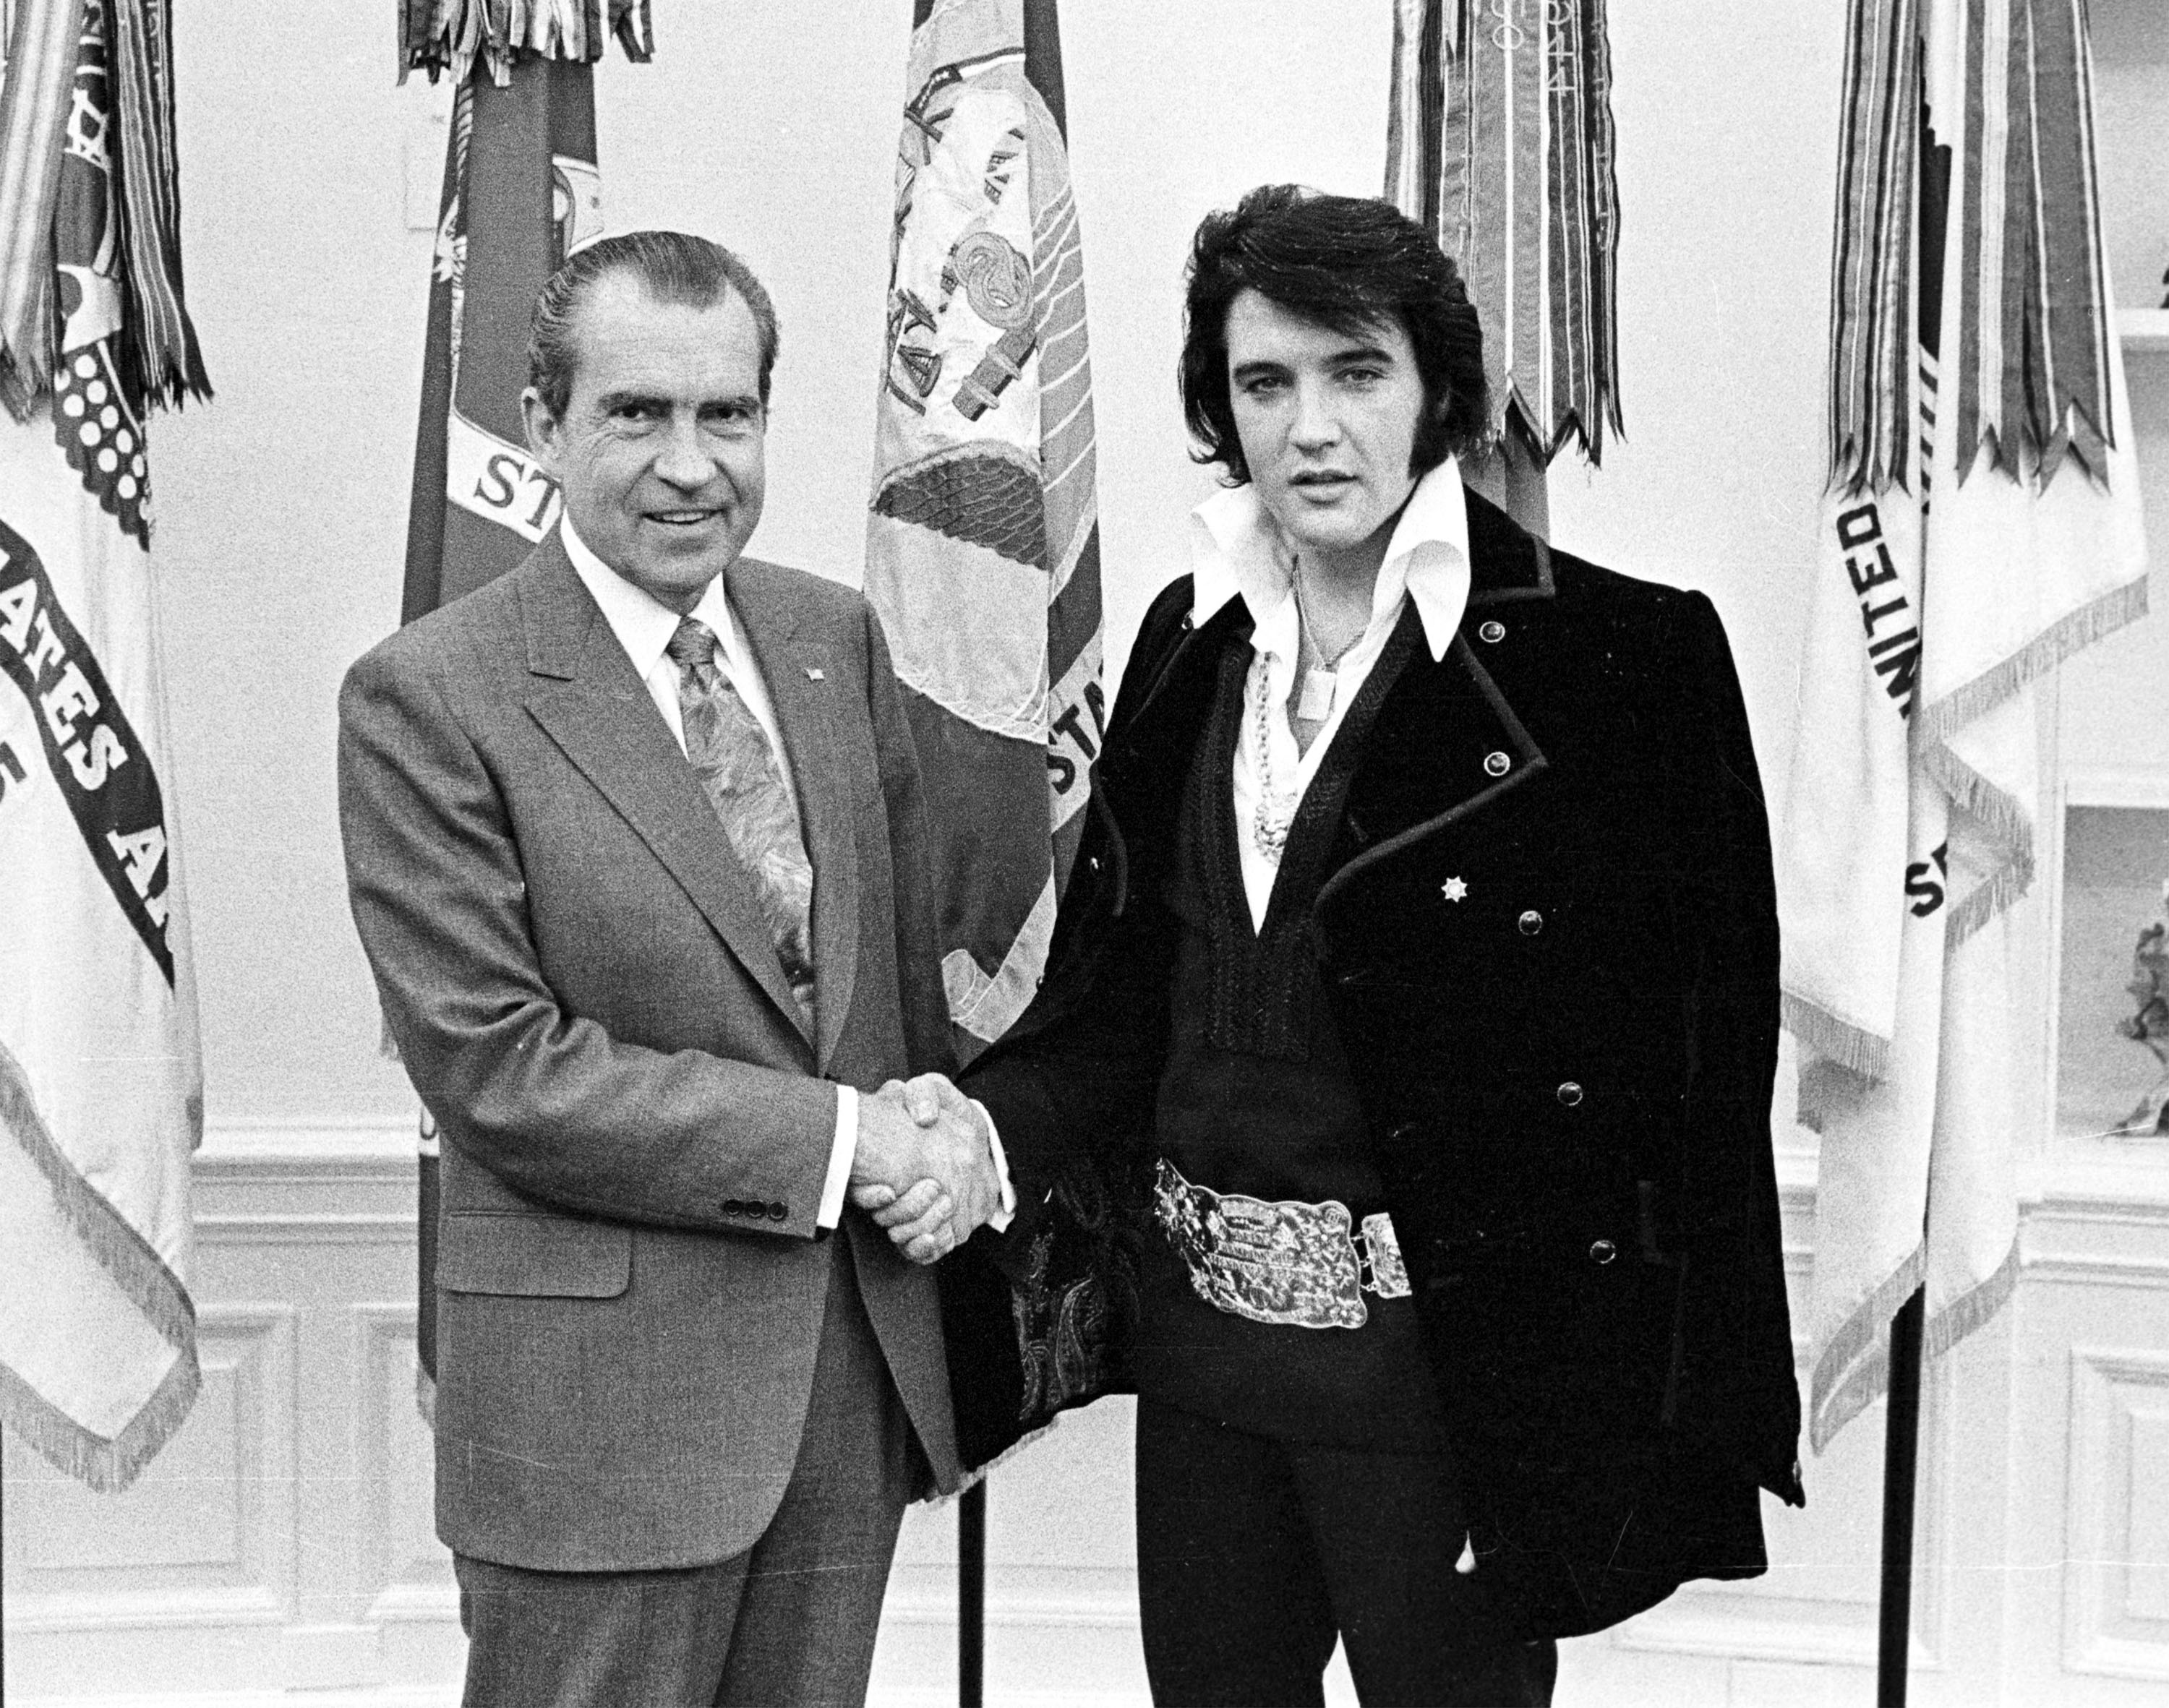 The 1970 historic meet of "The King of Rock and Roll" Elvis Presley and President Richard Nixon. | Photo: Getty Images